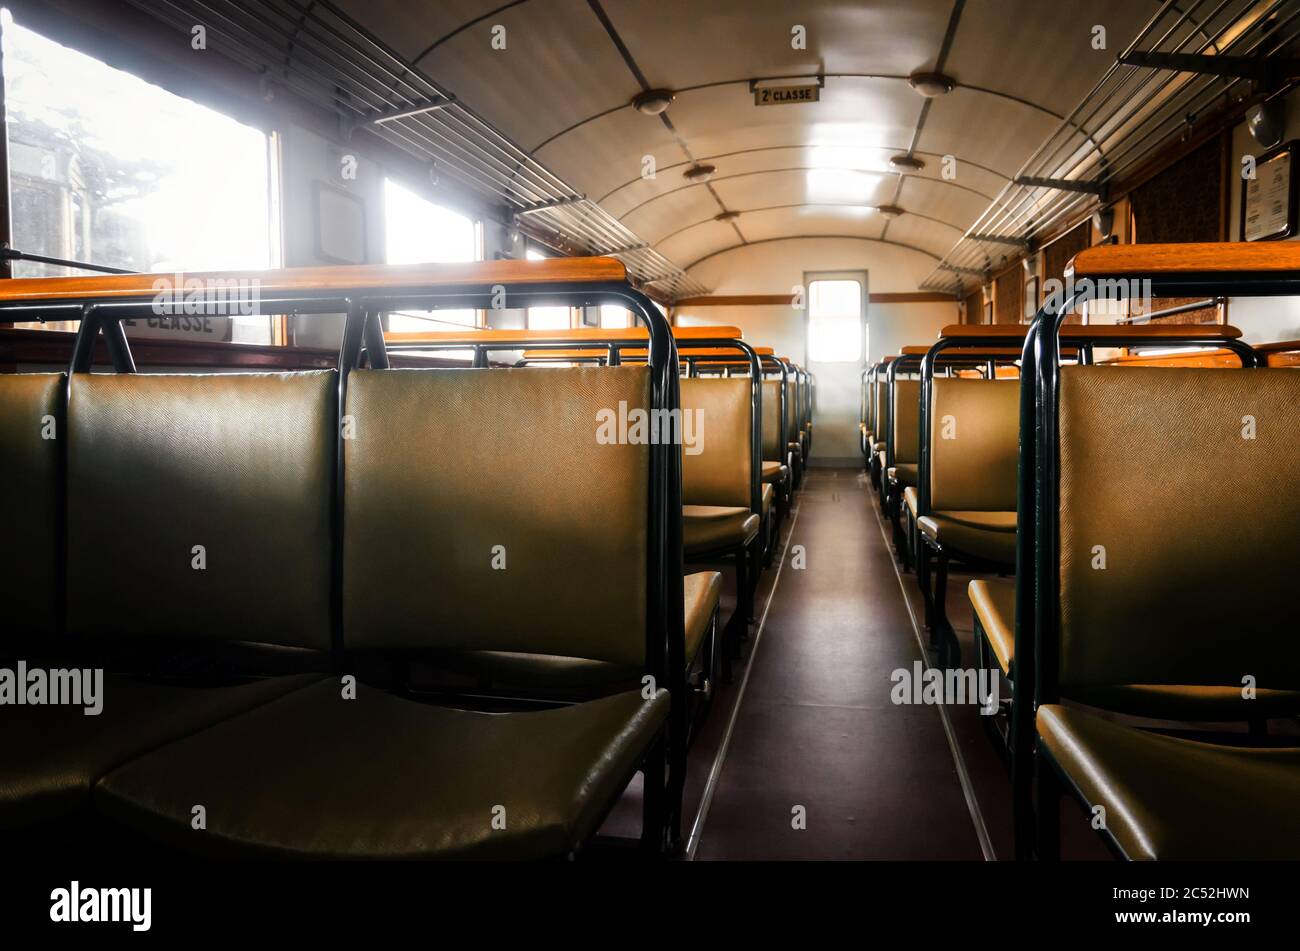 Second class compartment of an italian Littorina, old rail motor coach from world war II period Stock Photo